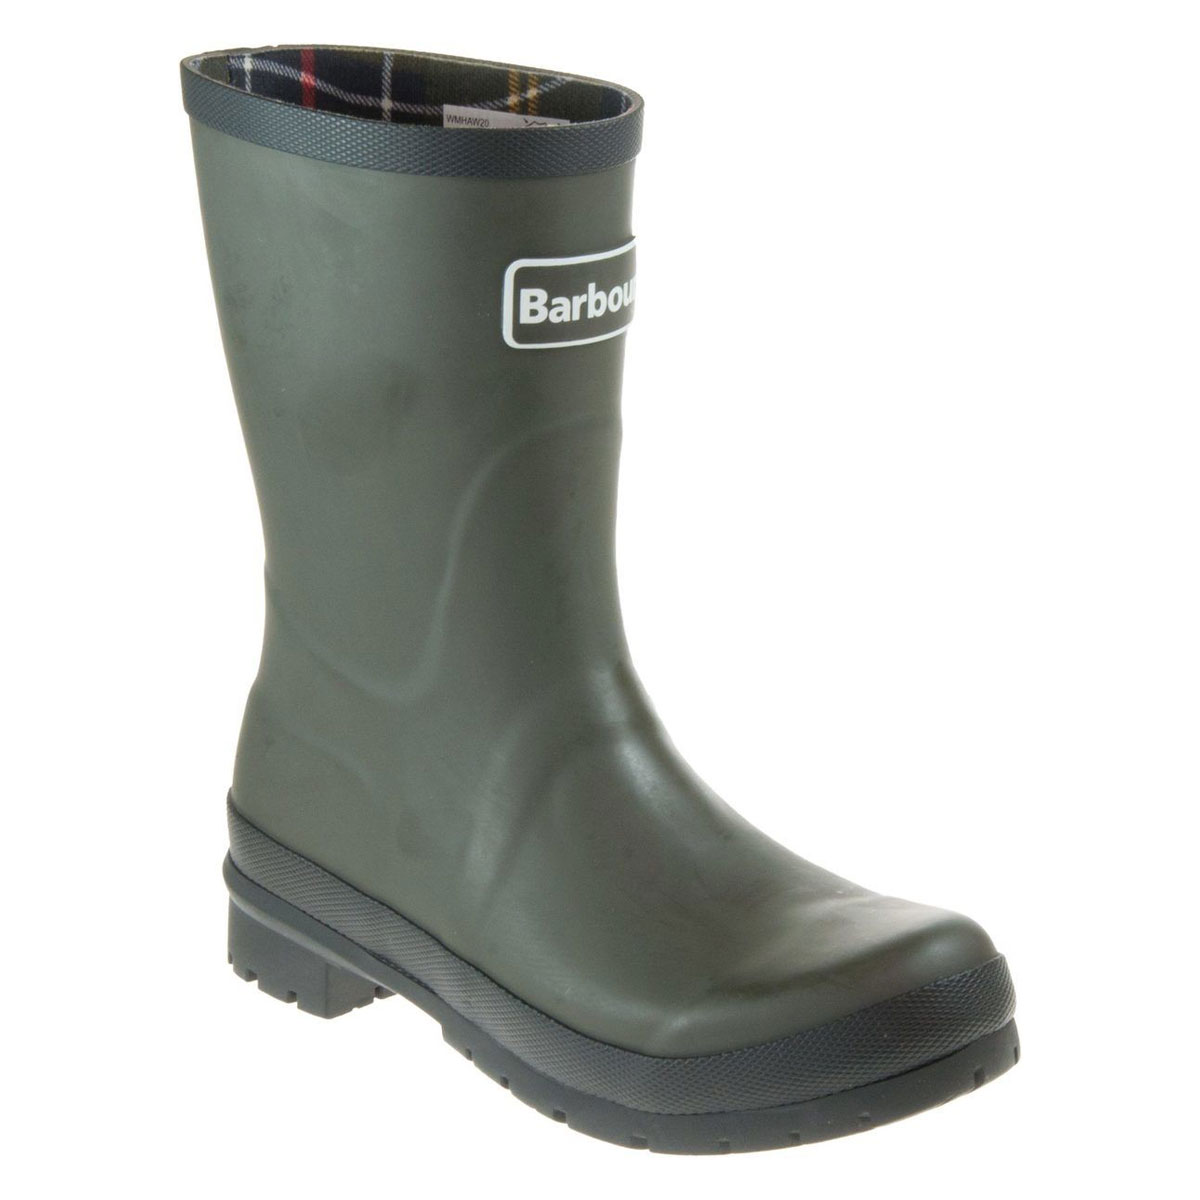 Barbour Banbury Wellie Olive Green Womens Mid Calf Boots LRF0084-OL11 in a Plain Man-made in Size 6